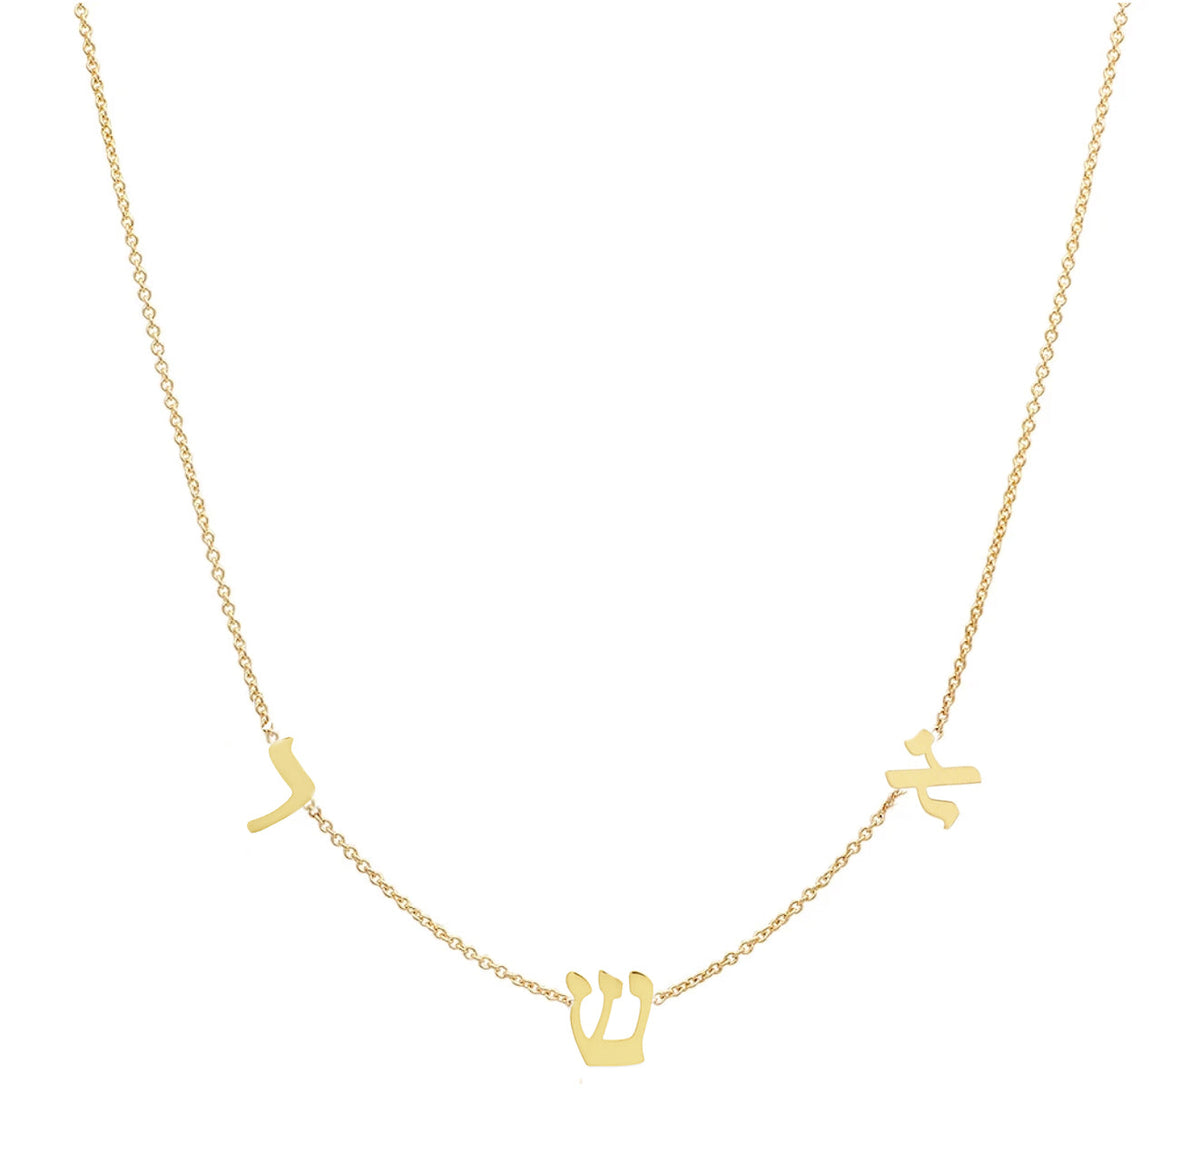 Taly Initial Necklace